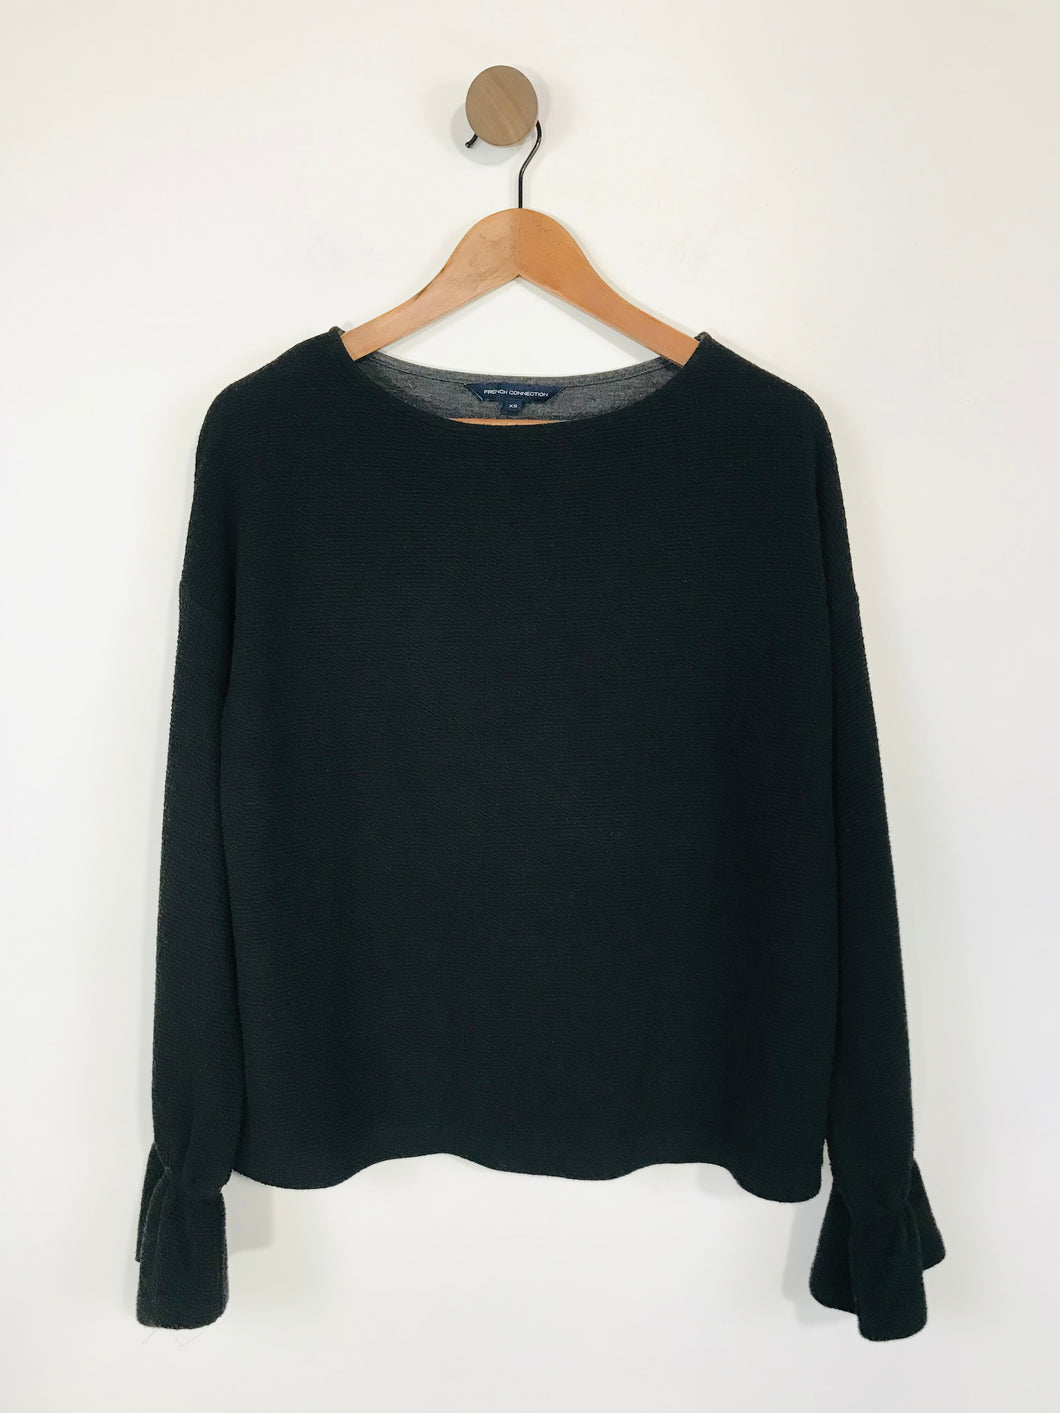 French Connection Women's Jumper | XS UK6-8 | Black